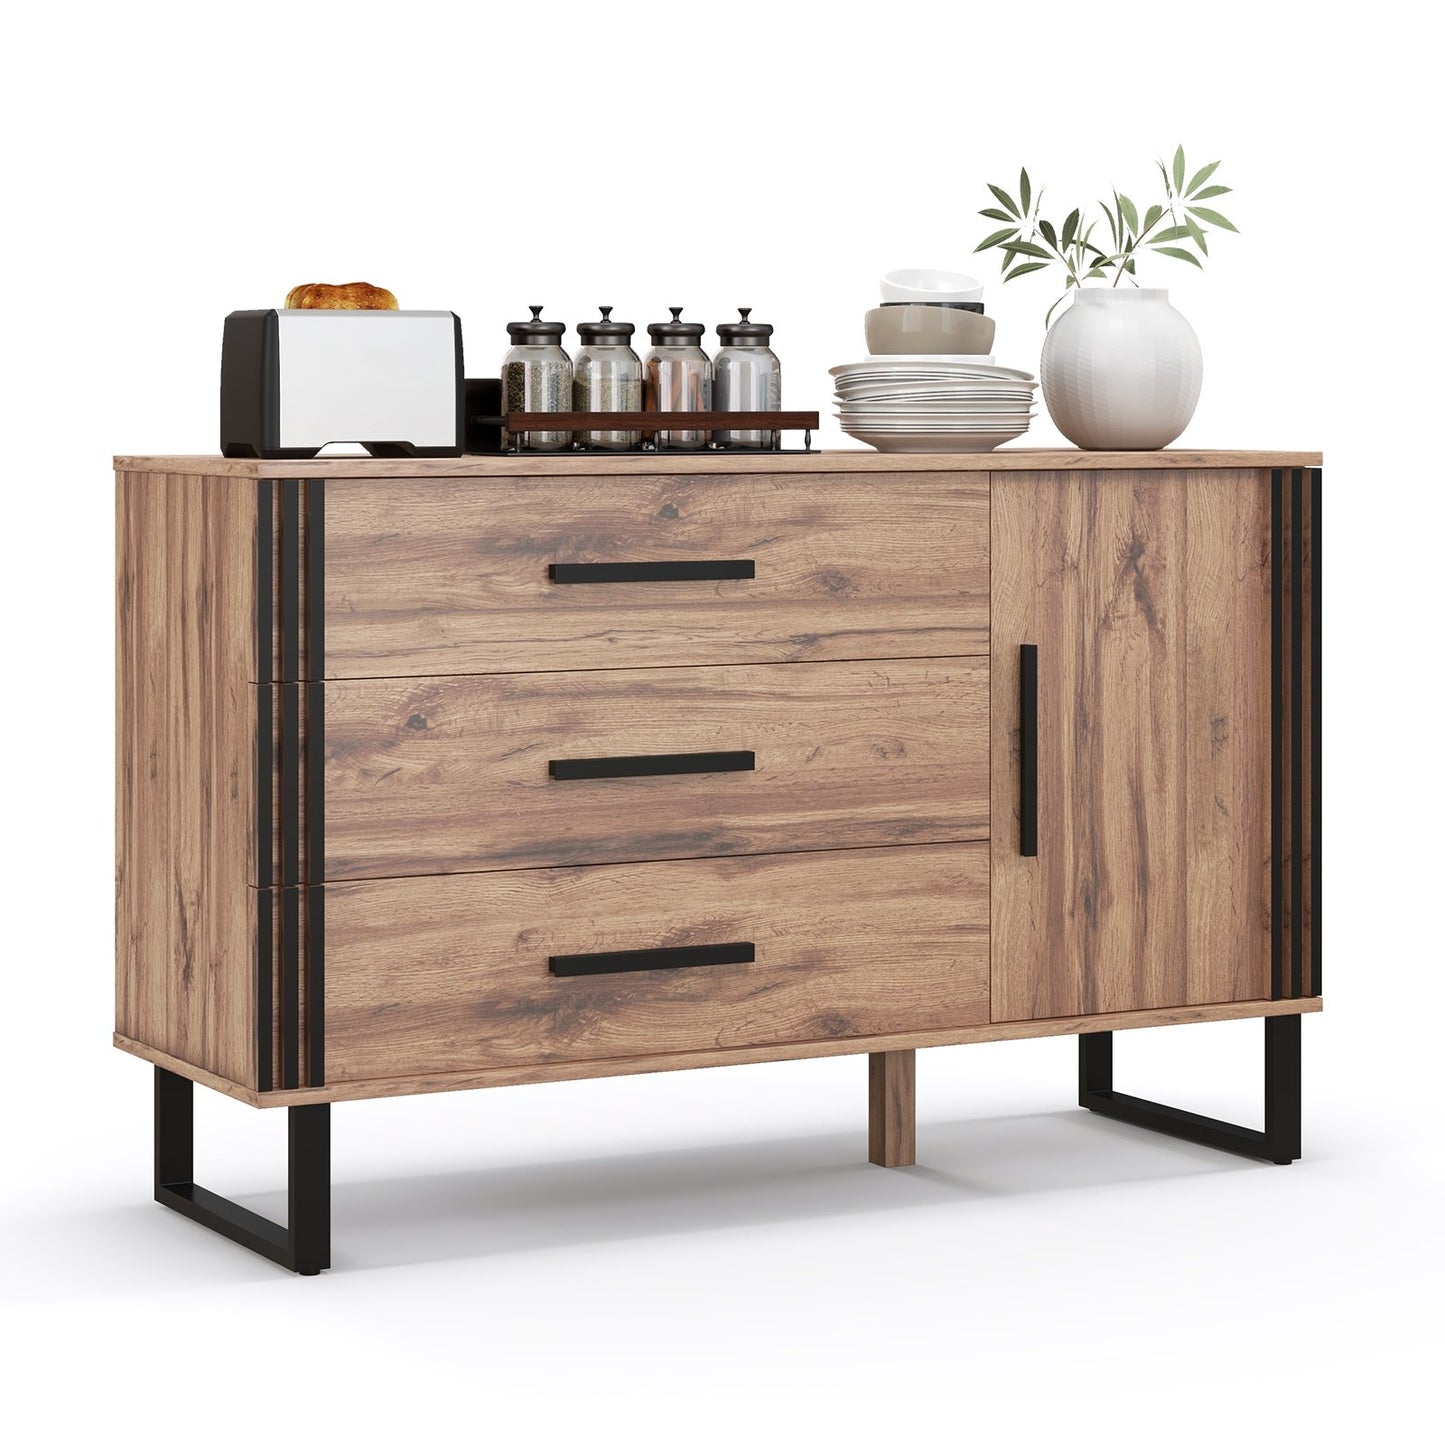 Sideboard Buffet Cabinet Credenza Storage Cabinet with 3 Drawers, Rustic Brown